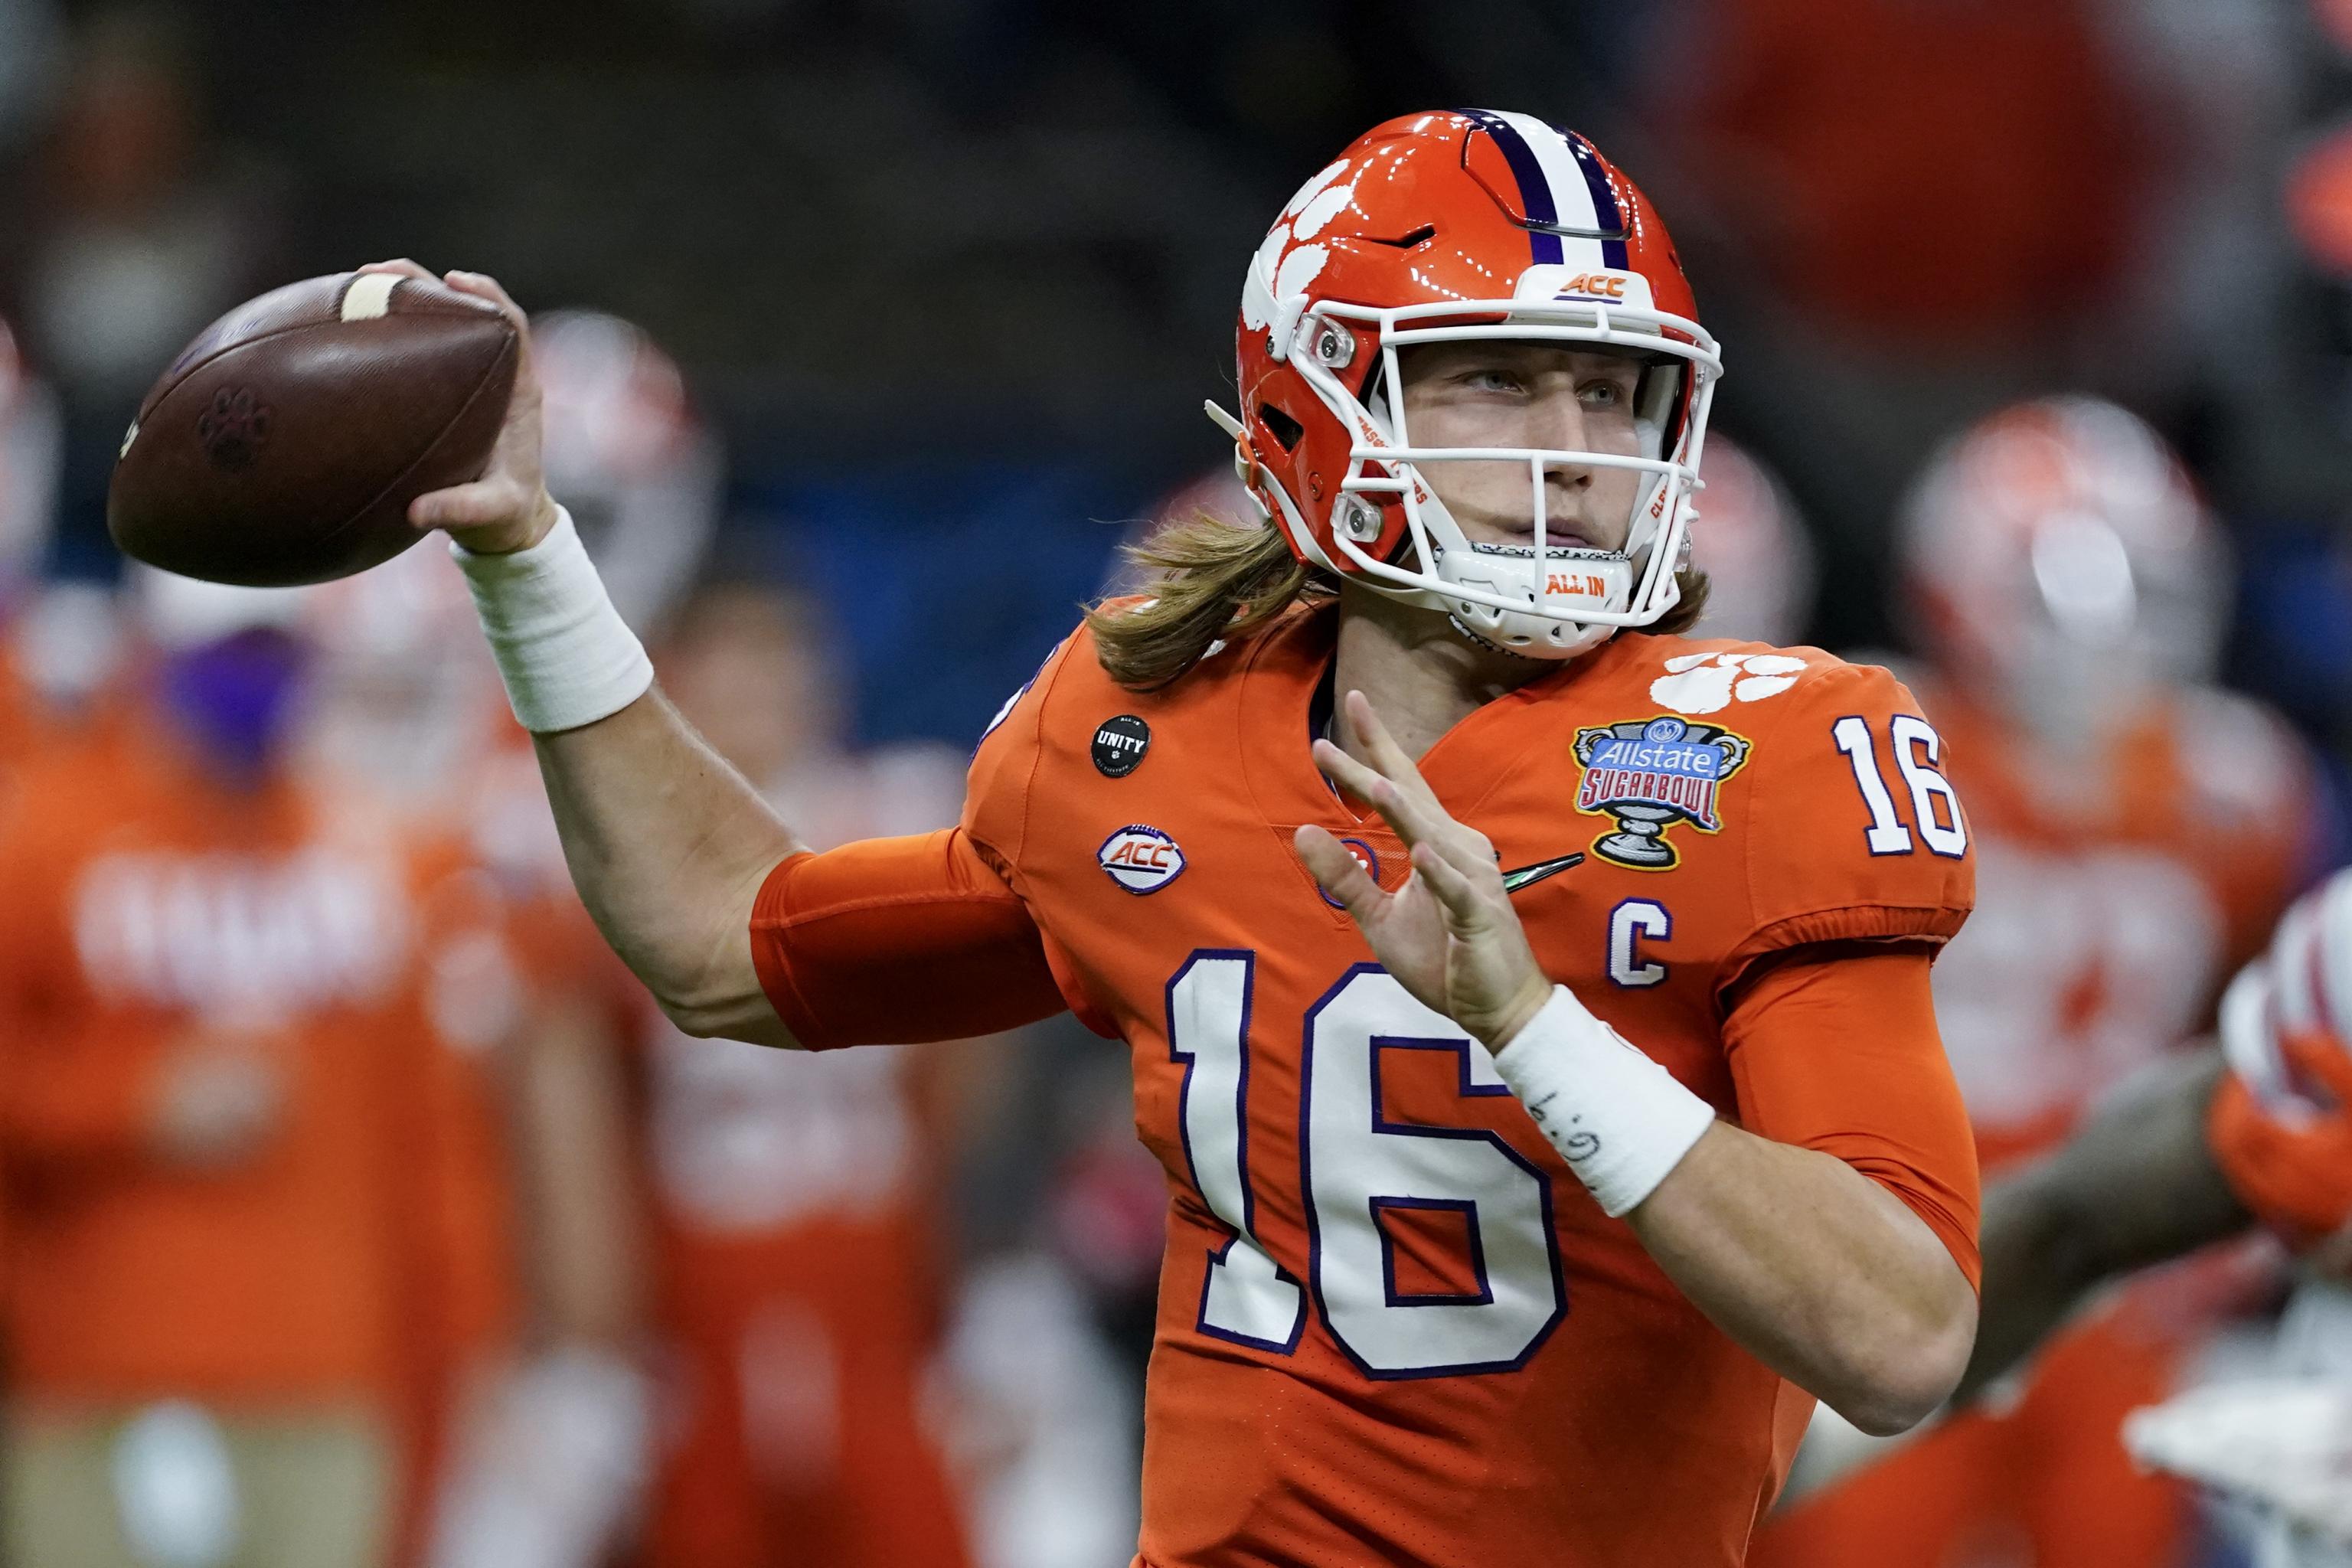 NFL: We found all of the Trevor Lawrence uniform edits on the interne